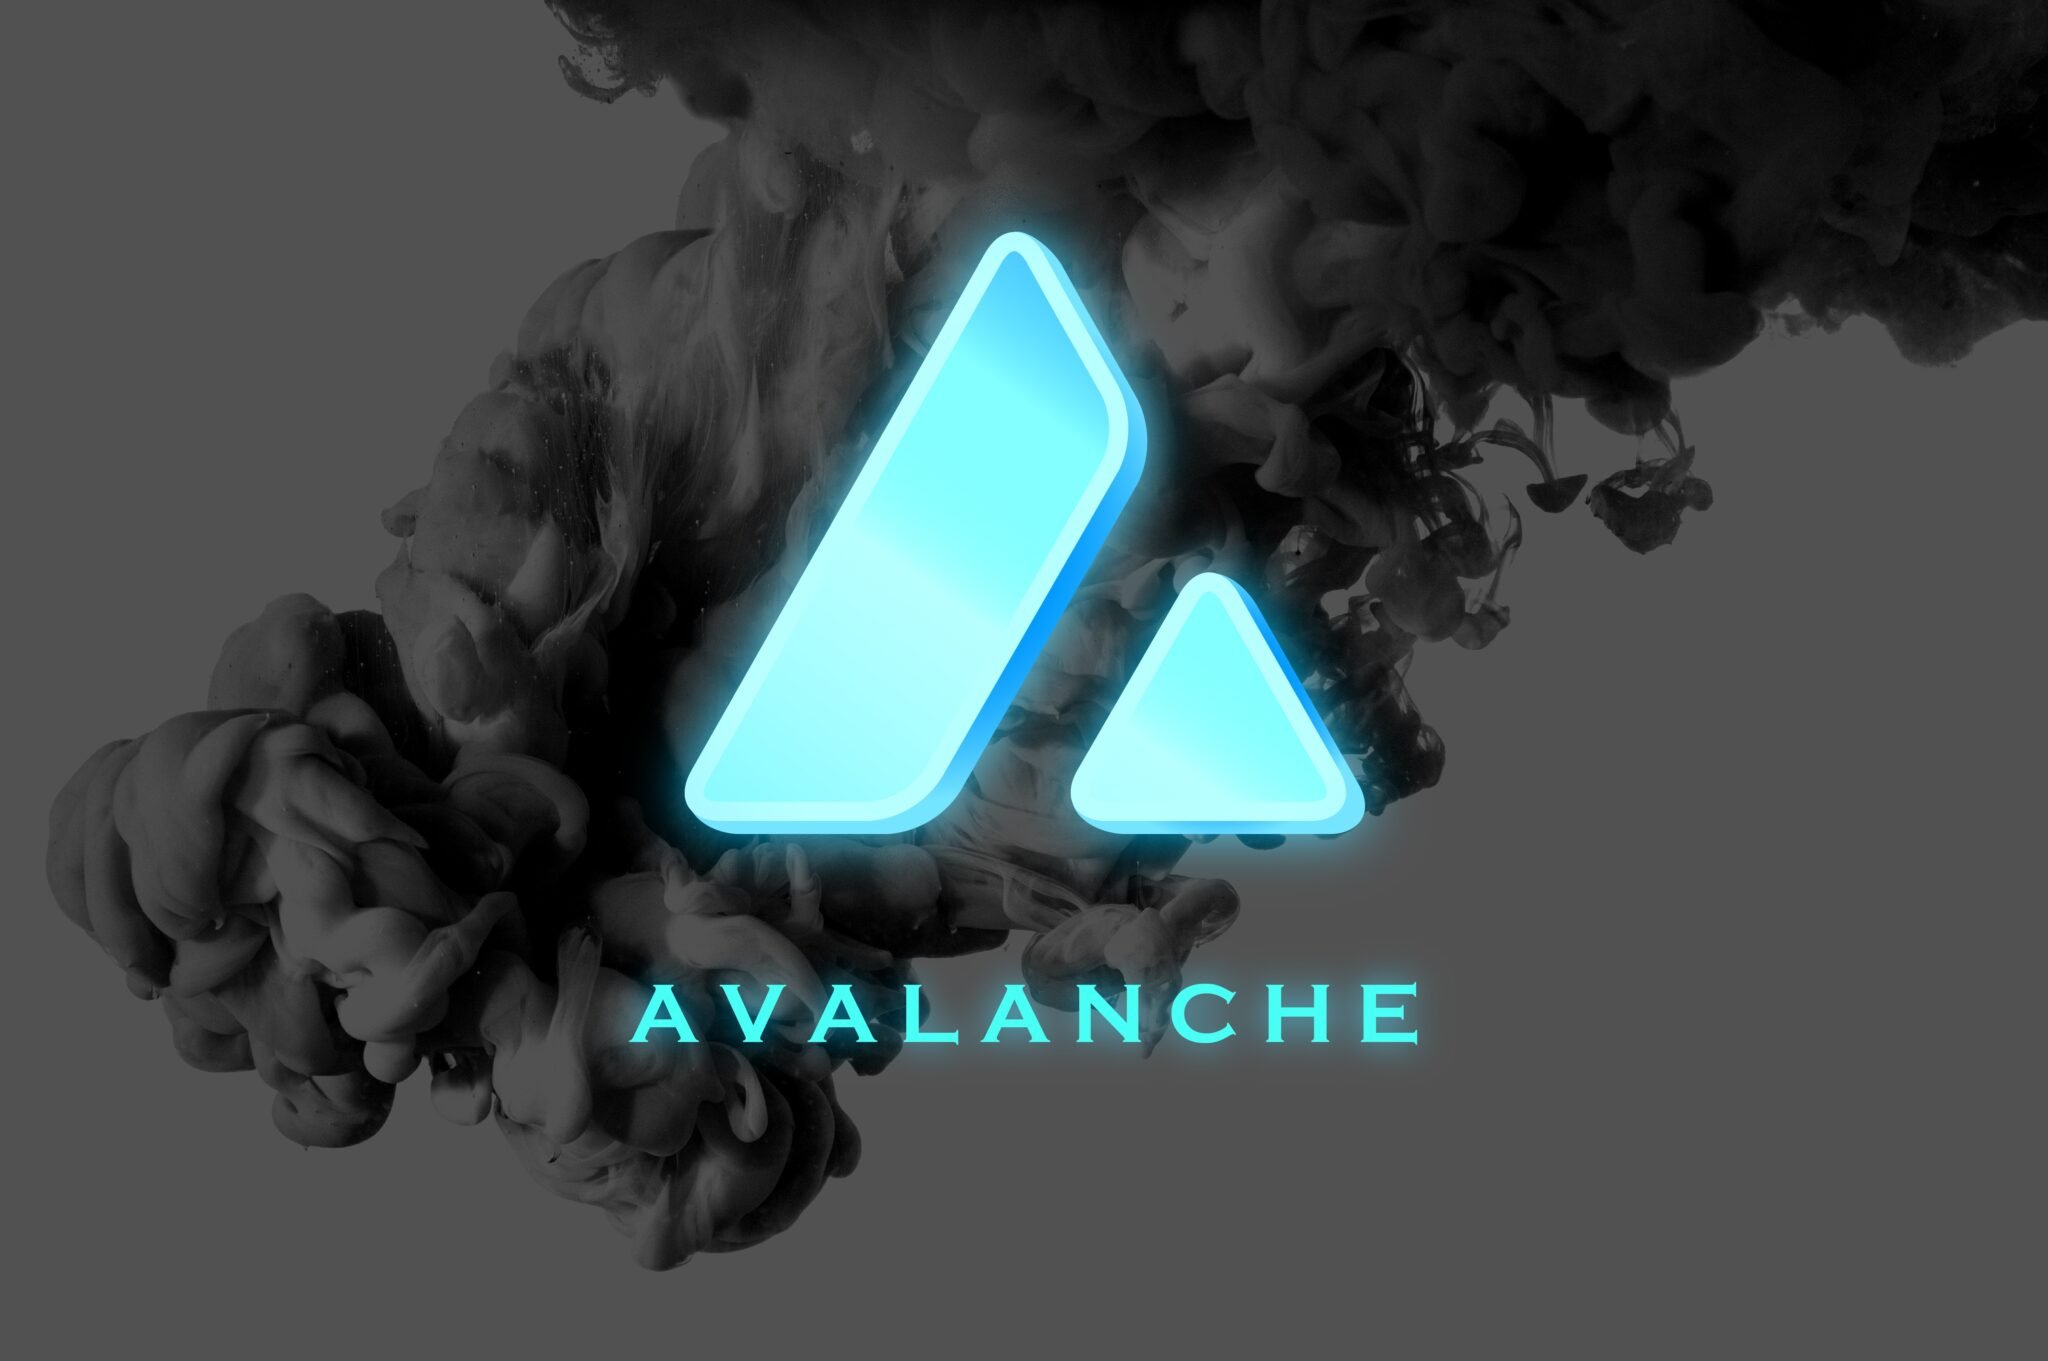 Avalanche AVAX banner. AVAX coin cryptocurrency concept banner background.